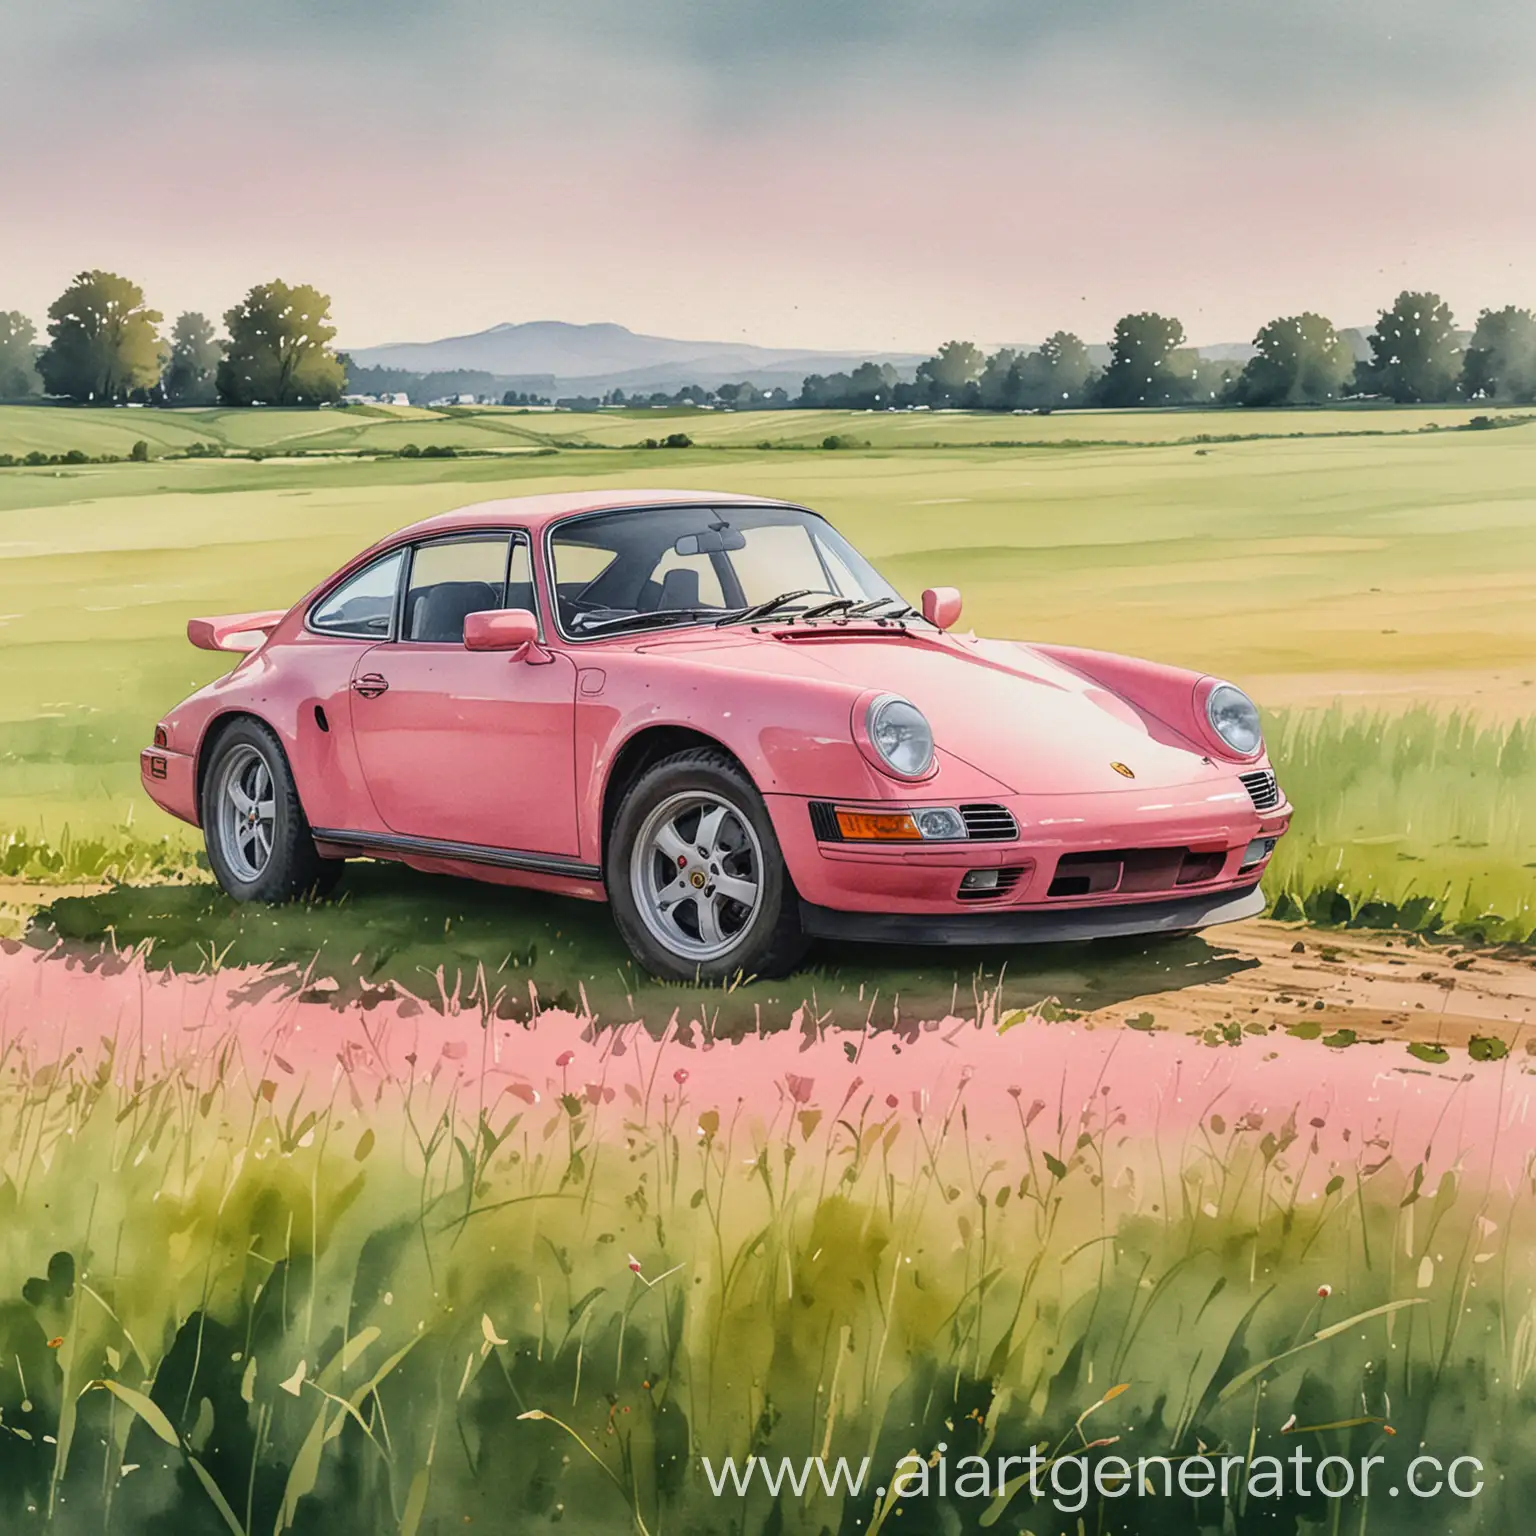 Pink-Porsche-Classic-Car-on-Grassy-Meadow-in-Watercolor-Painting-Style